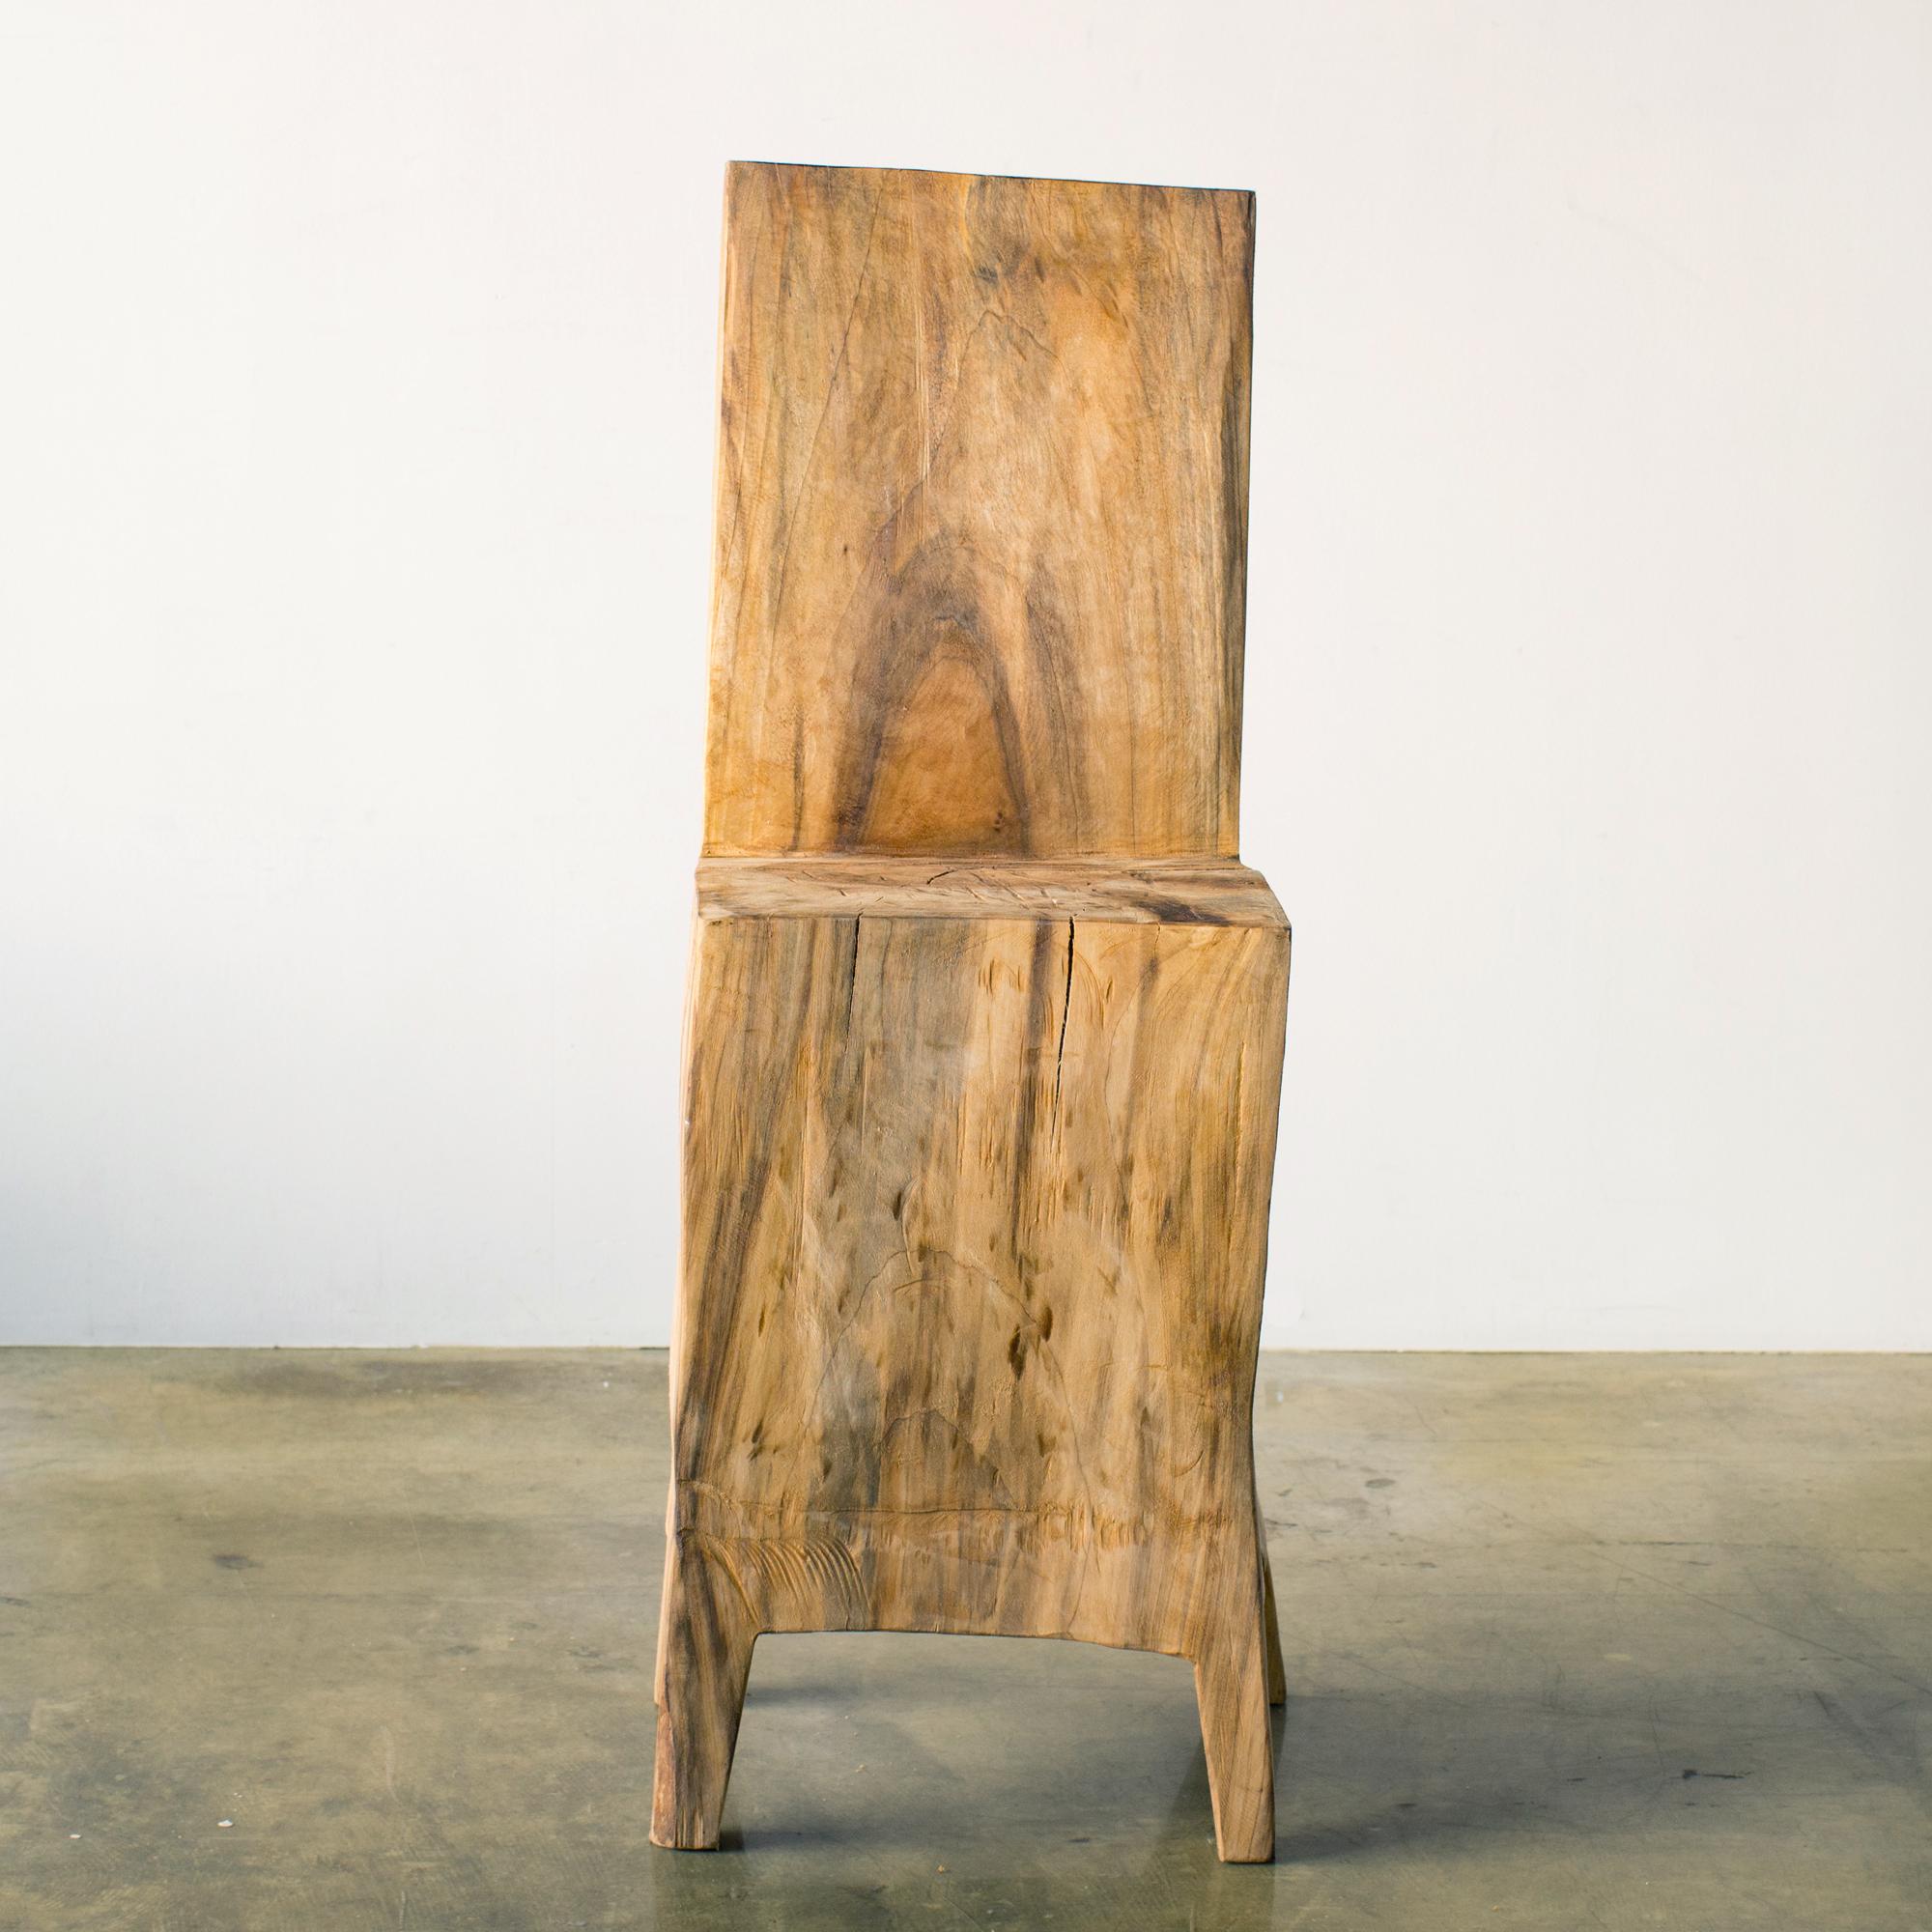 Cubo chair
chair by Hiroyuki Nishimura.
Material oak
This work is carved from log with some kinds of chainsaws.
Most of wood used for his works are unable to use anything, these woods are unsuitable material for furniture, or architectural use,